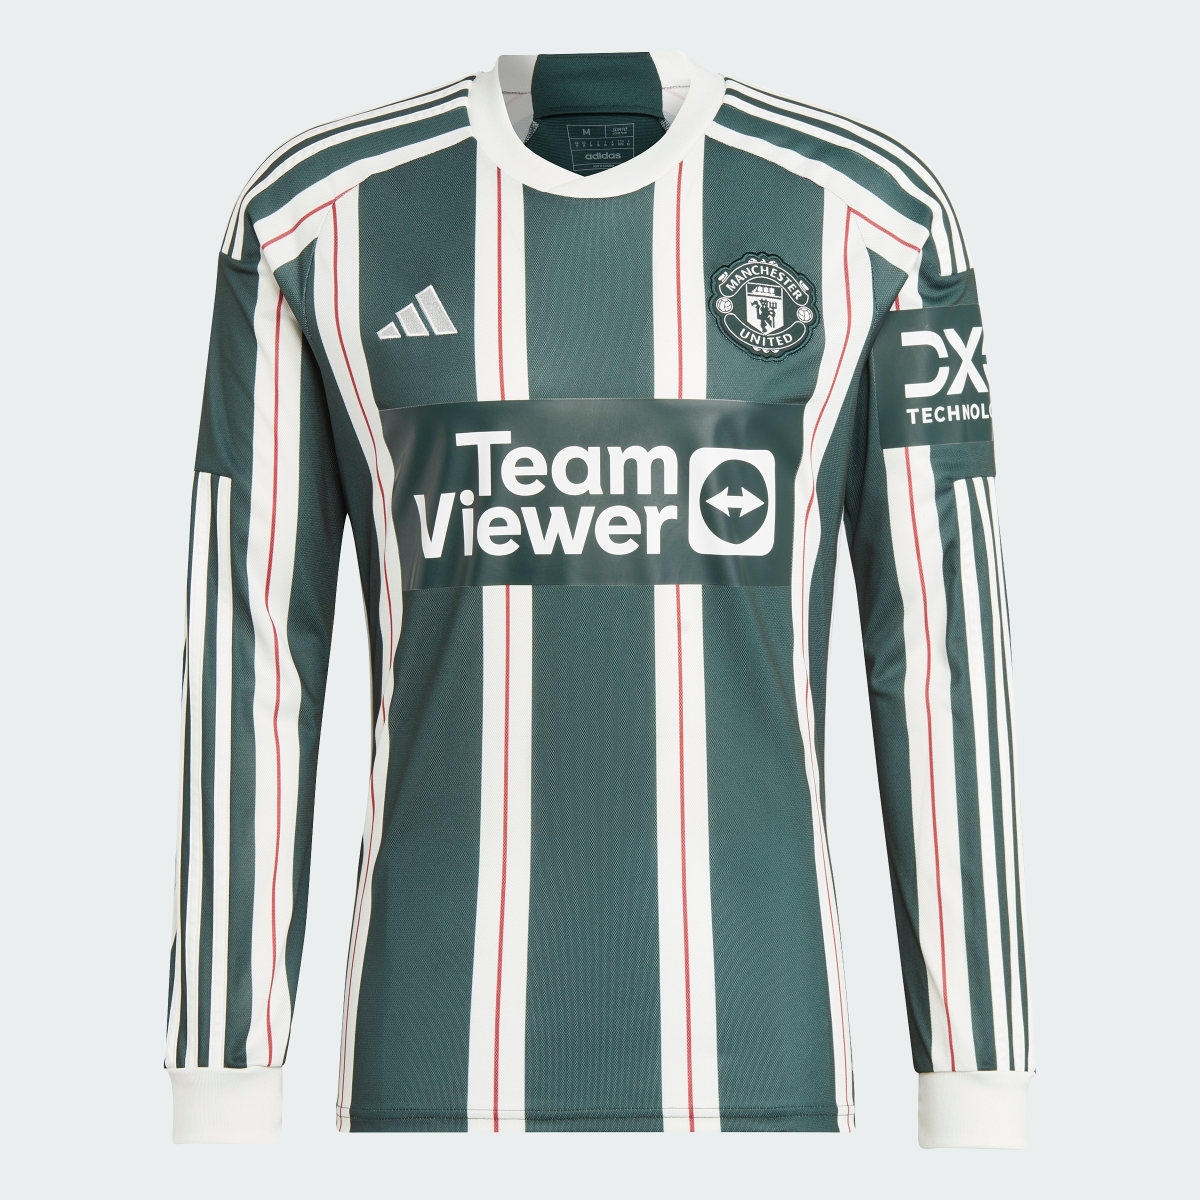 Adidas Maglia Away 23/24 Long Sleeve Manchester United FC. 5